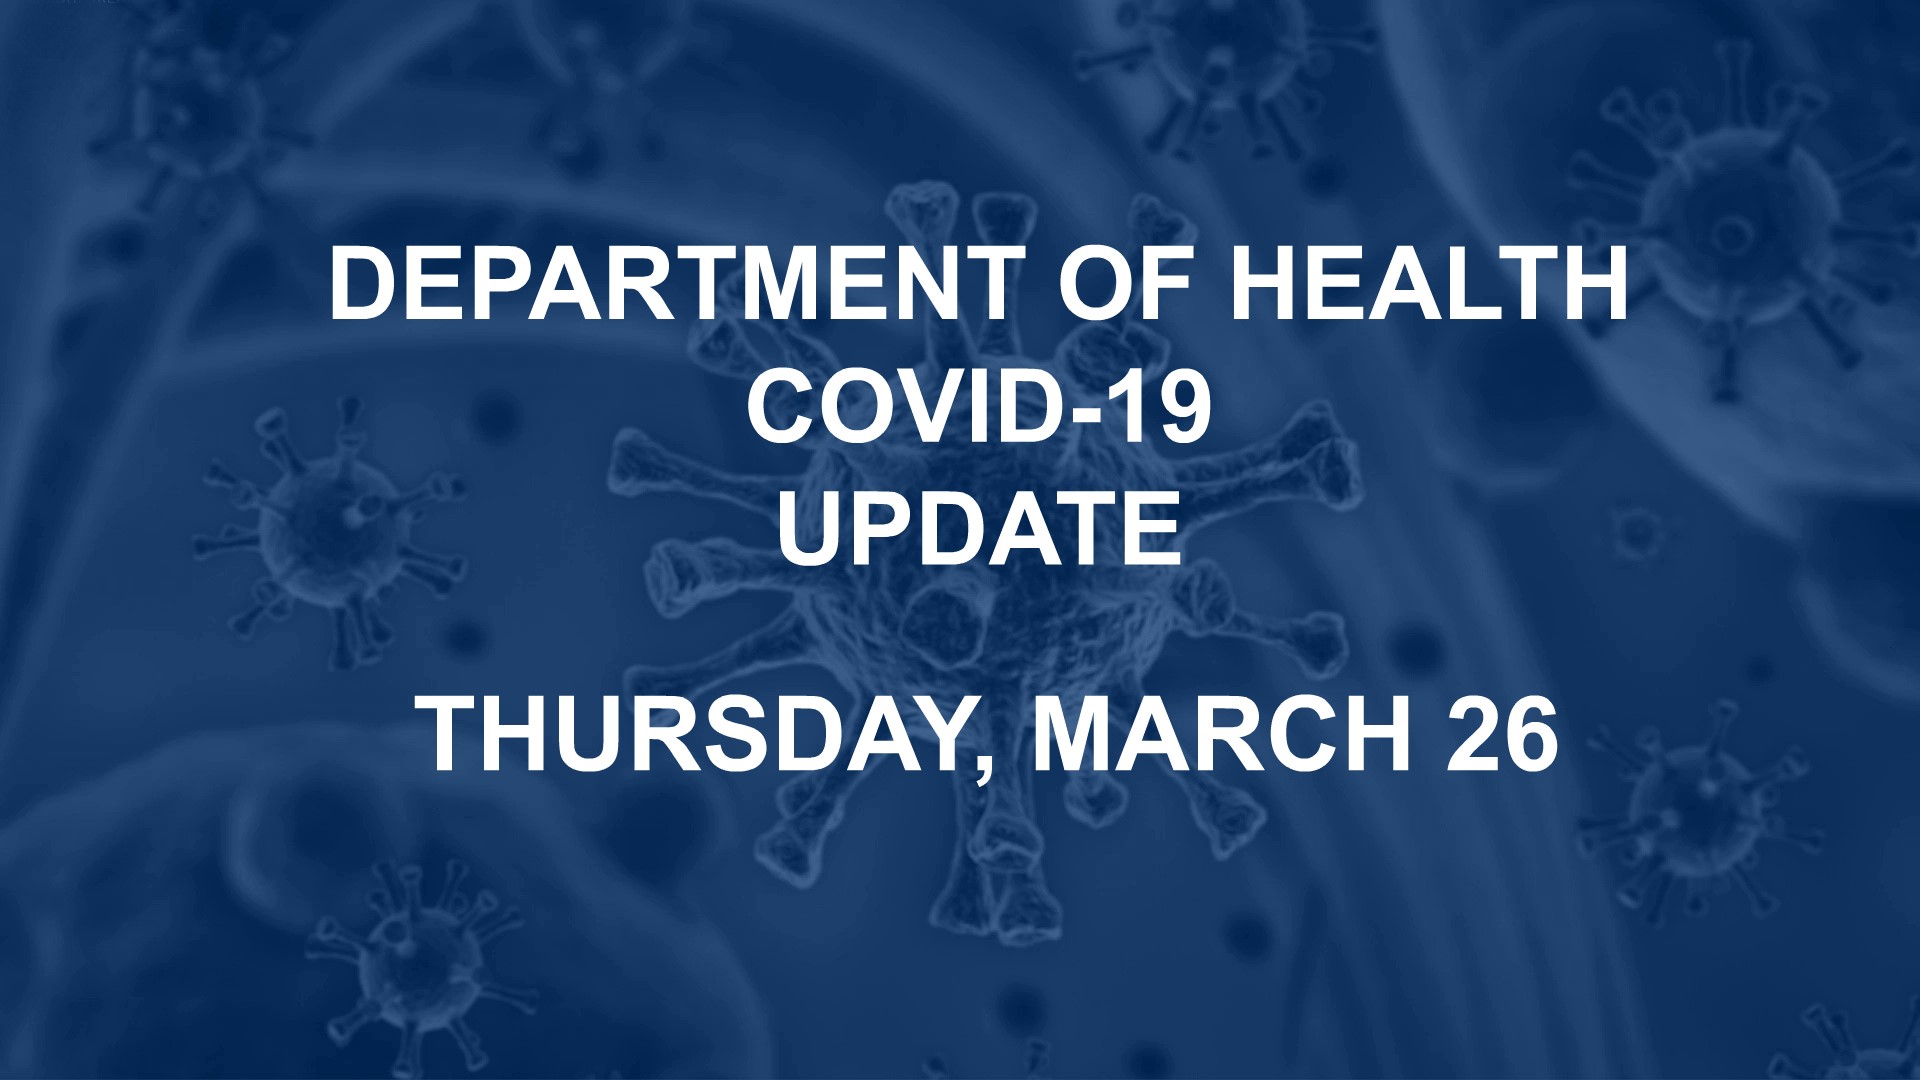 More than 500 new coronavirus infections were reported today by the Department of Health.